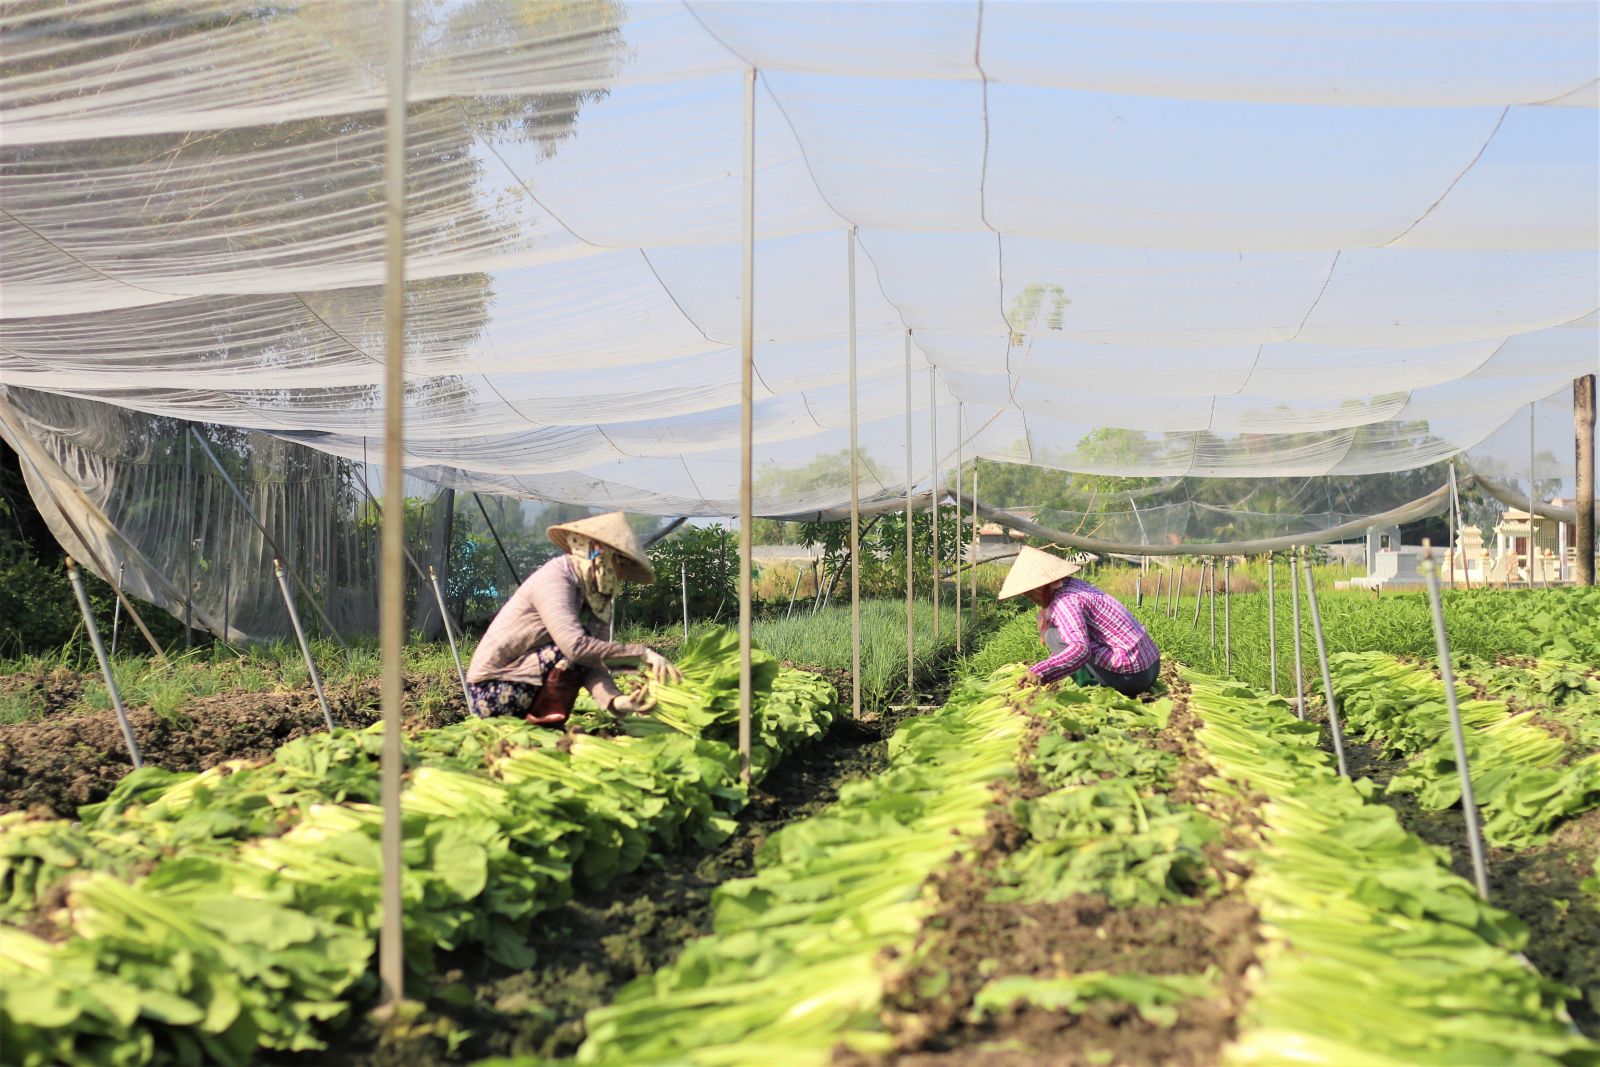  Safe vegetables of Muoi Hai Safe Vegetables Cooperative have been selected to develop the OCOP product